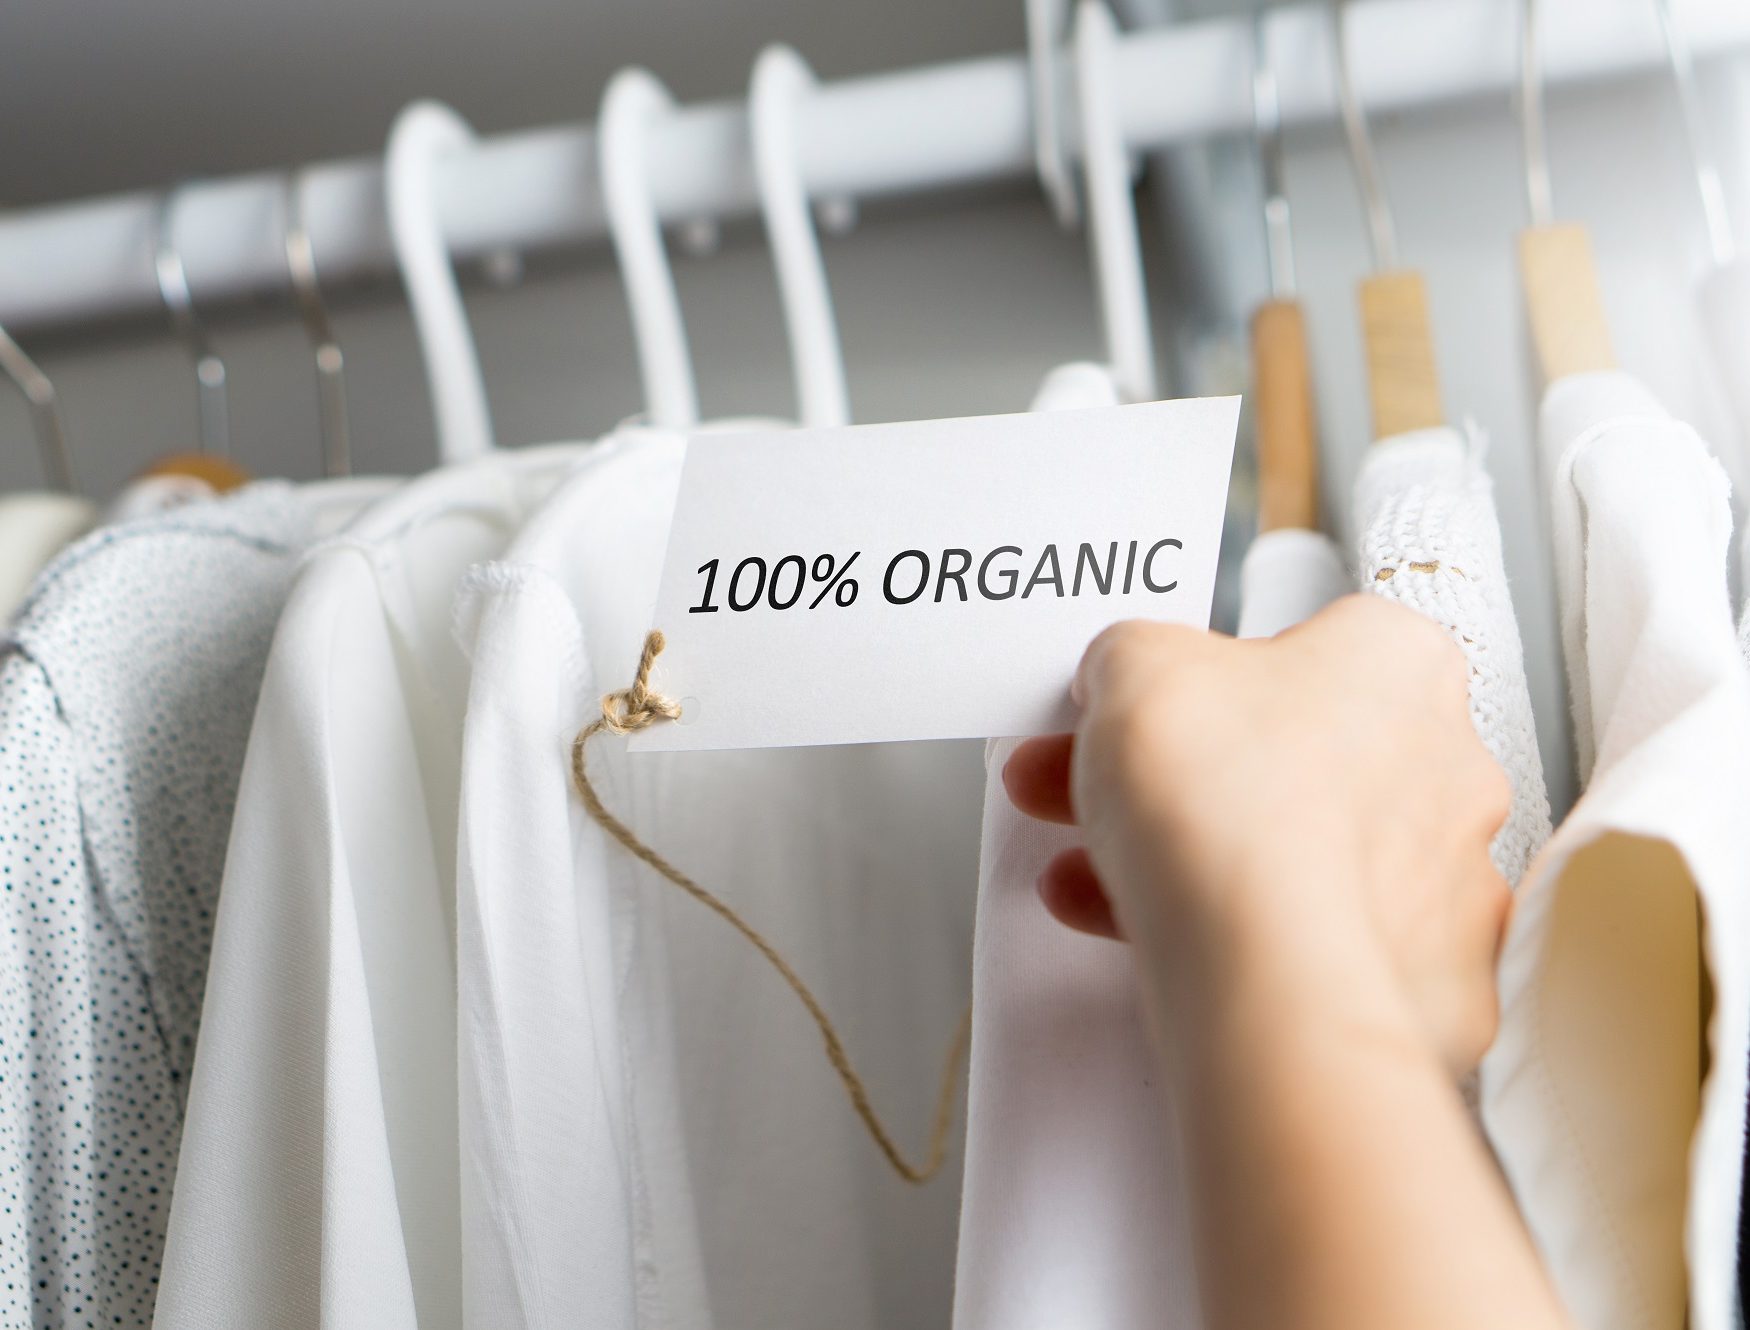 Why should we pay attention to sustainable fashion?